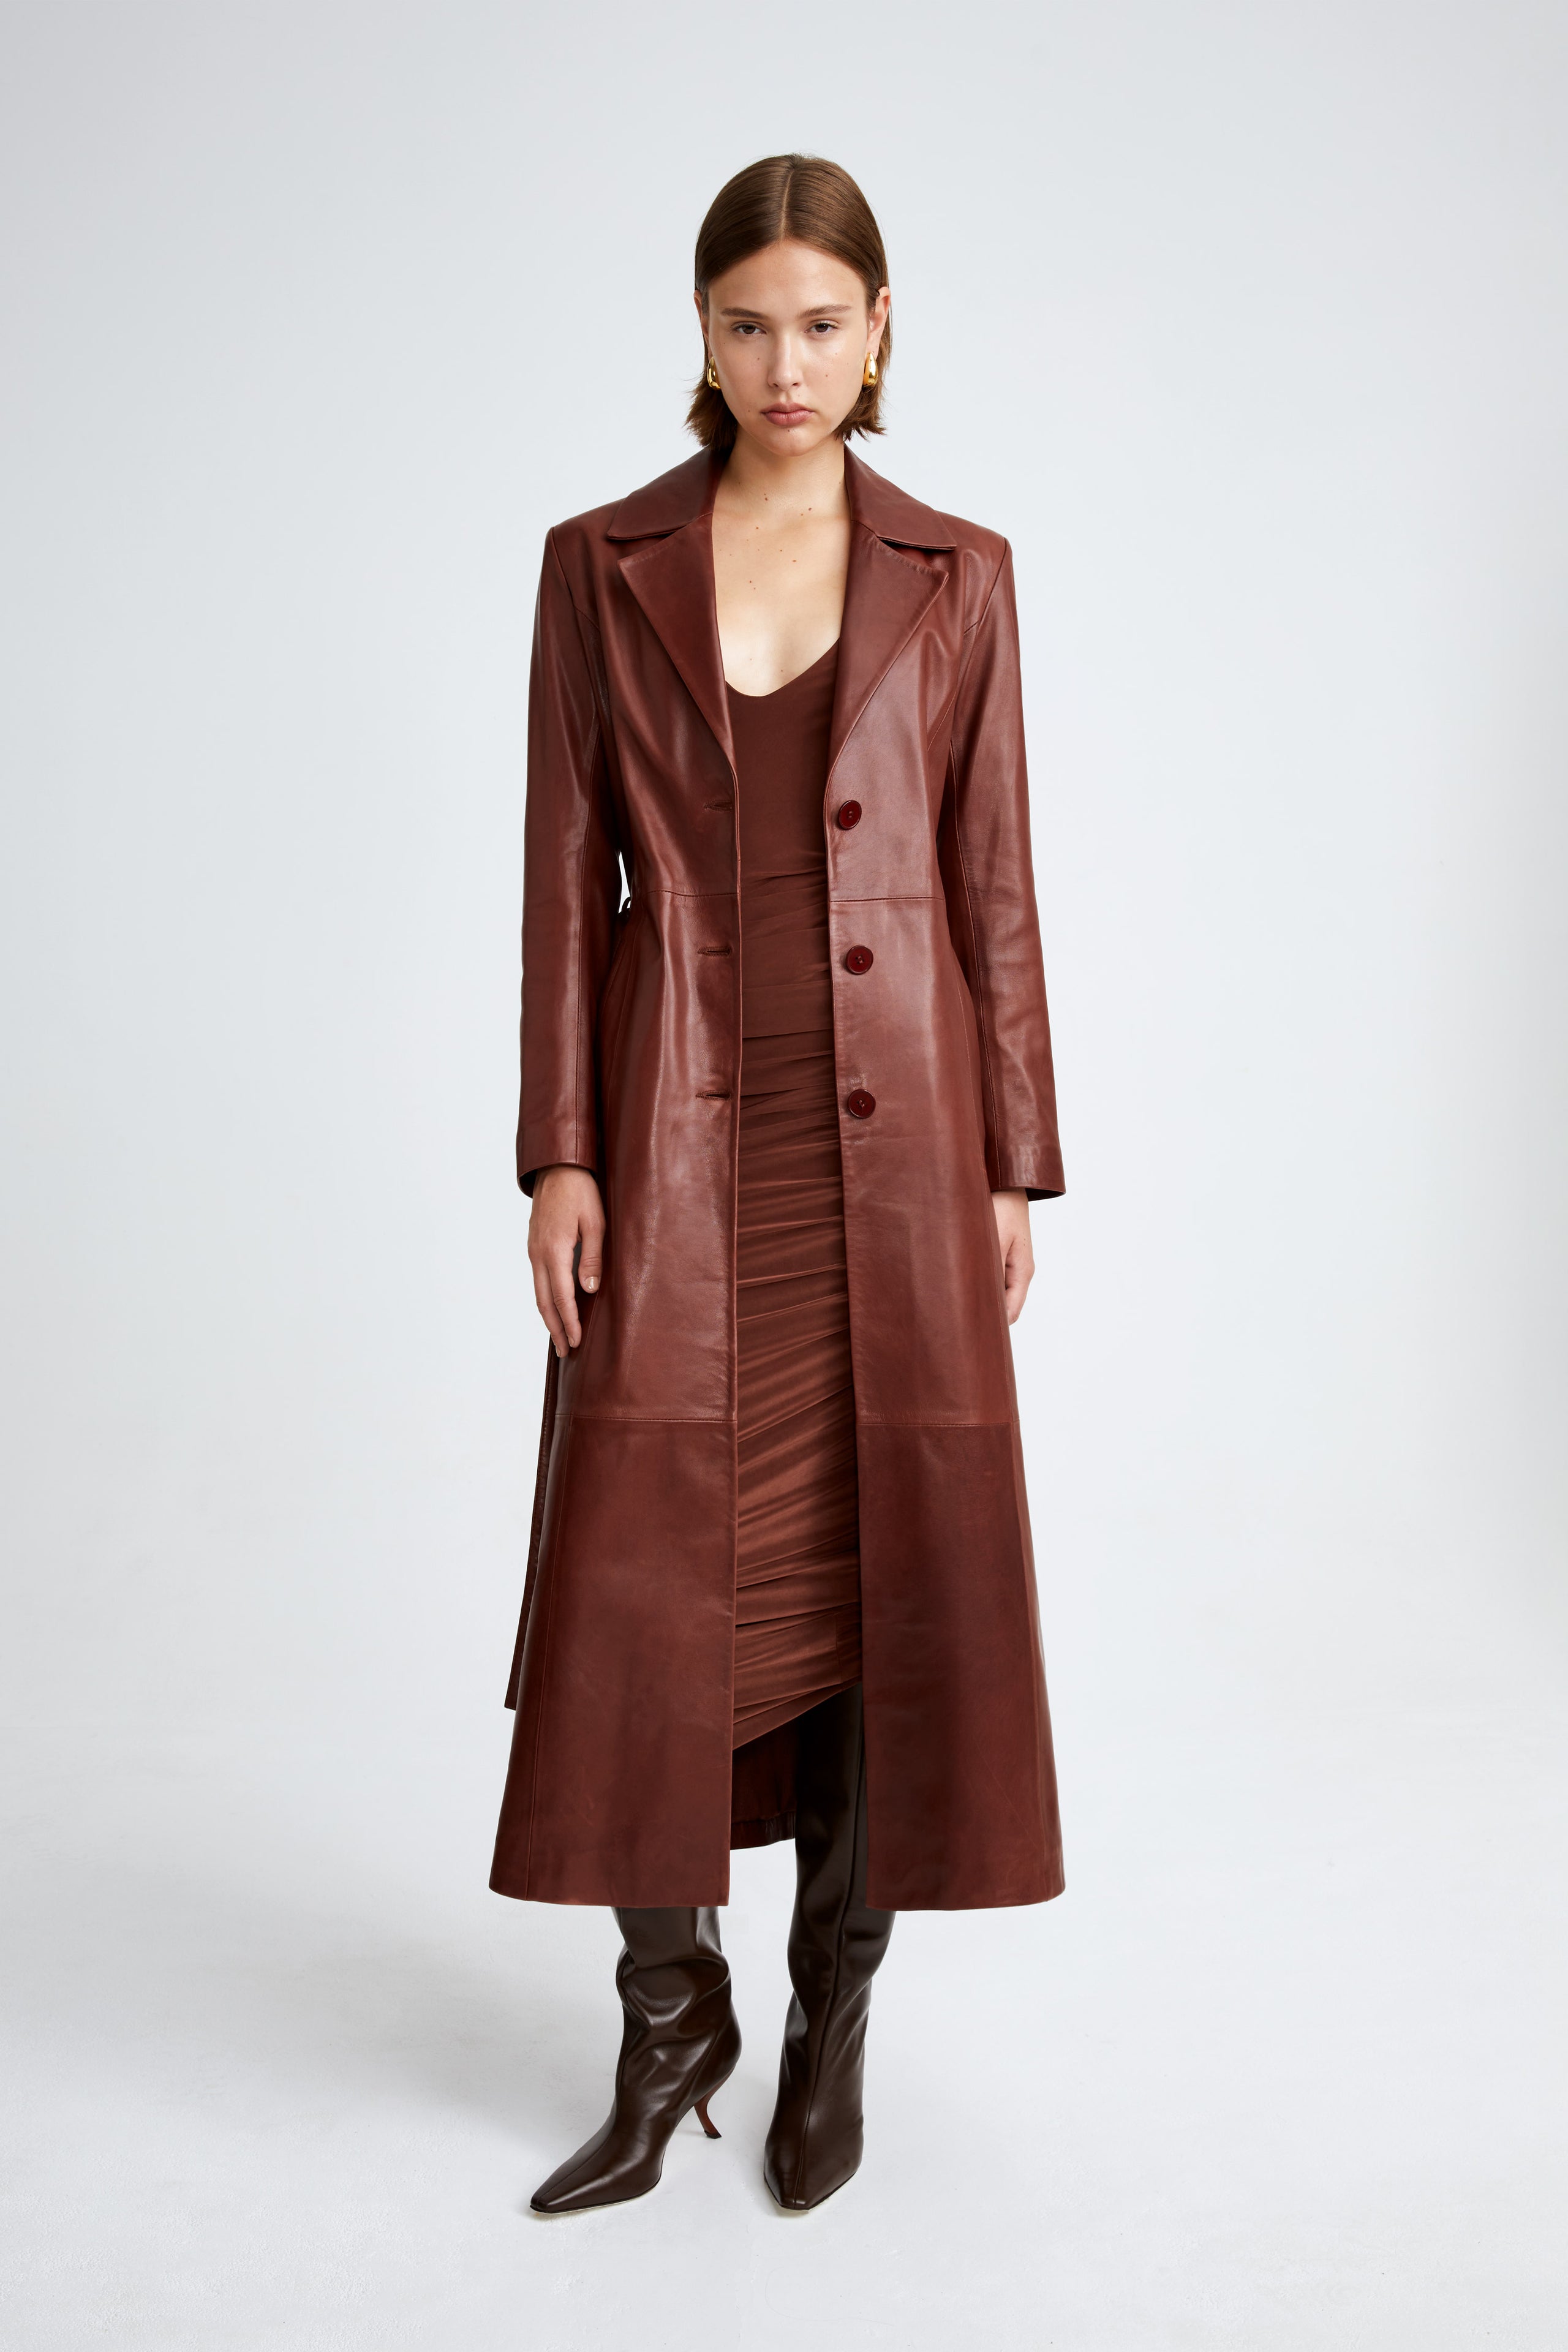 Cherry red trench coats